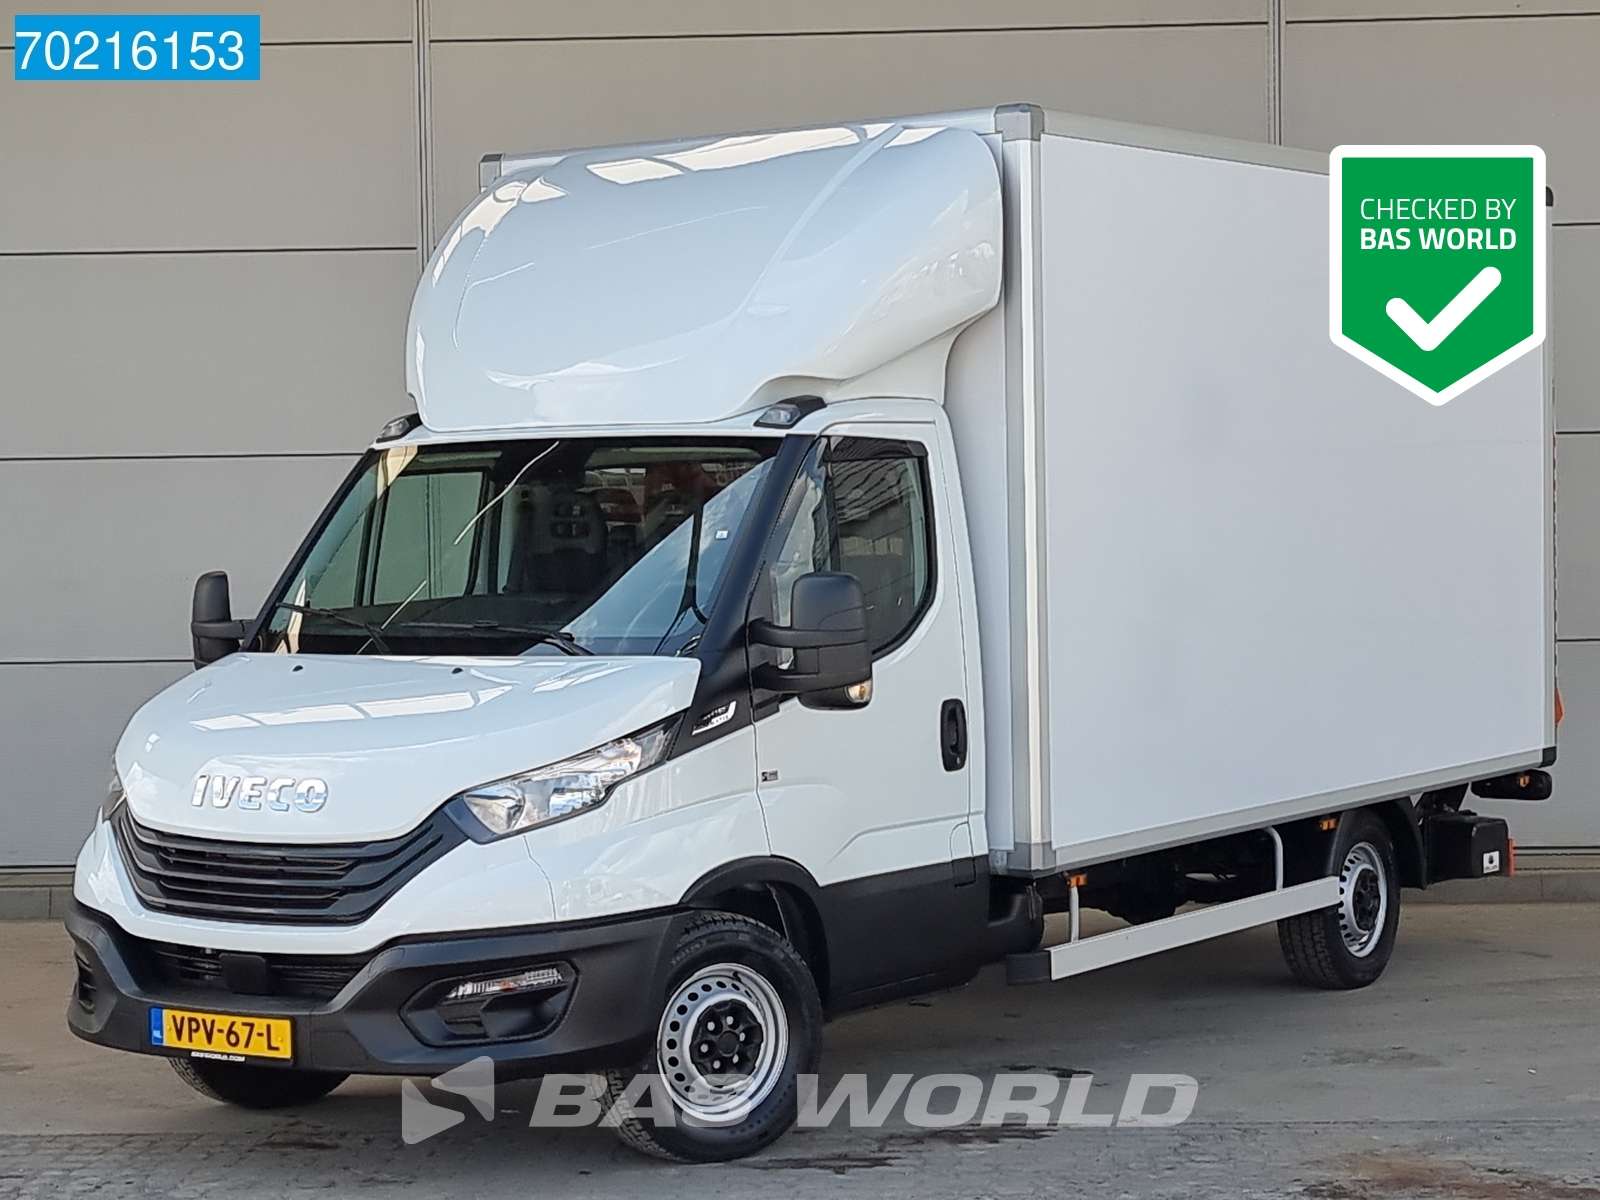 Iveco Daily Transporter in White used in VEGHEL for € 49,489.-